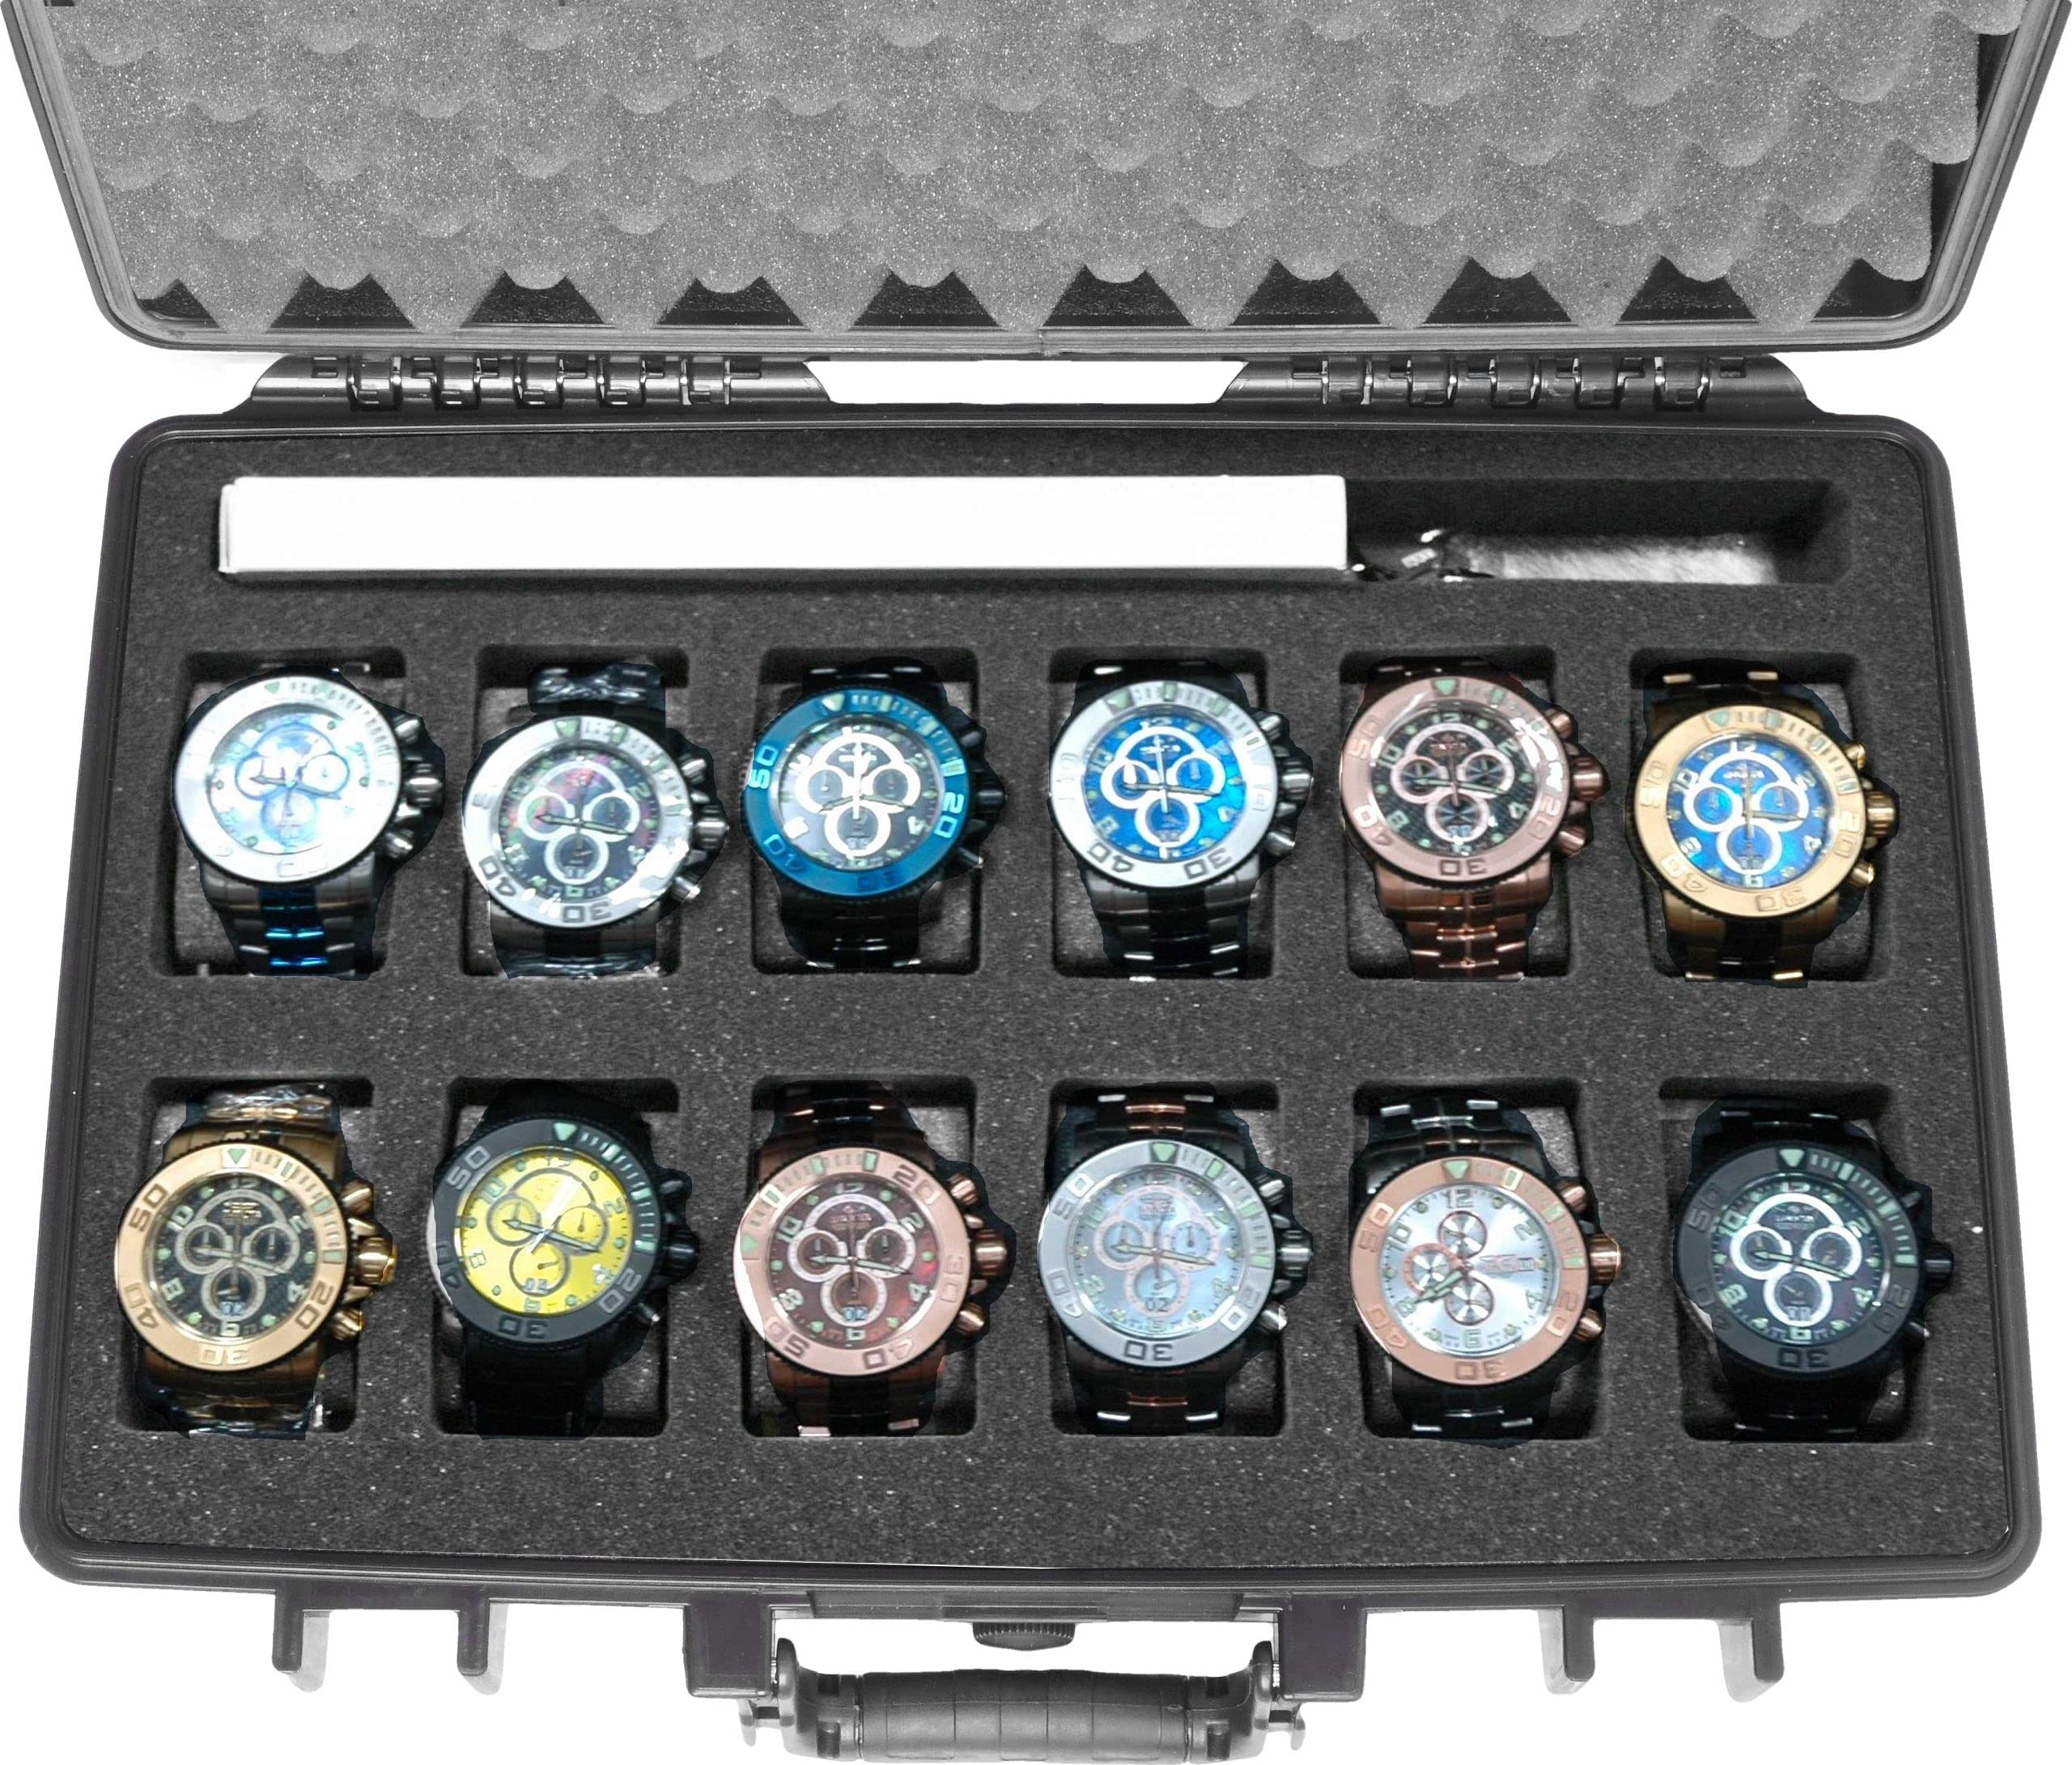 Case Club 12 Watch & Accessory Carry Case - Organize & Protect Your Watch Collection in a Hard Shell, Heavy Duty, Waterproof, Travel & Storage Case - For Men's & Women's Watches of Various Sizes